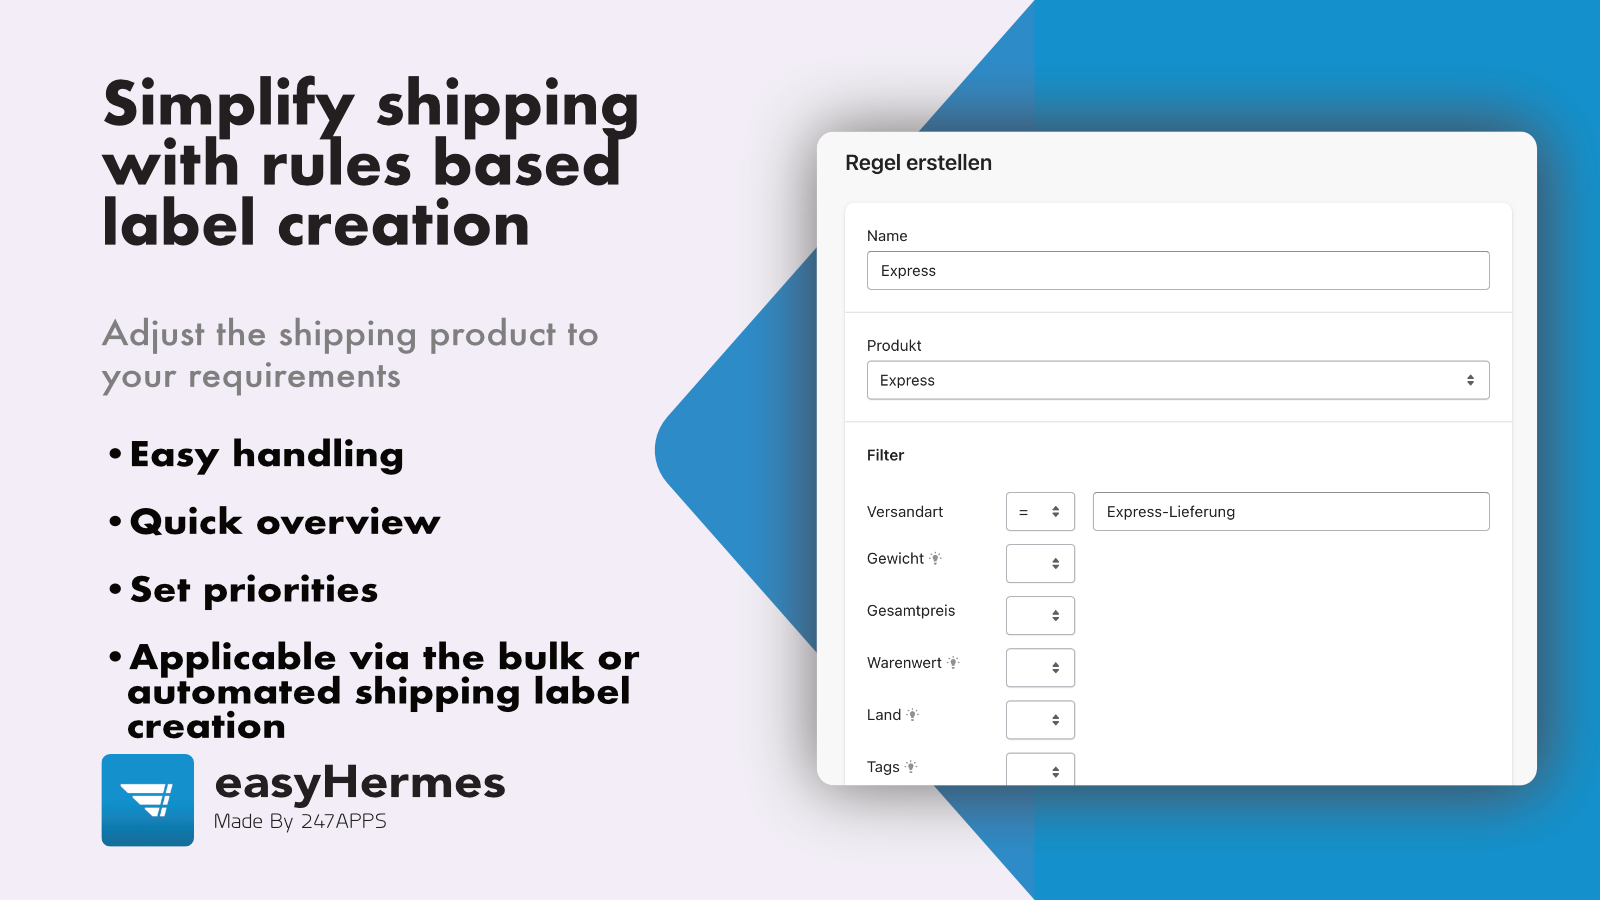 Simplify the shipping with rule based label creation